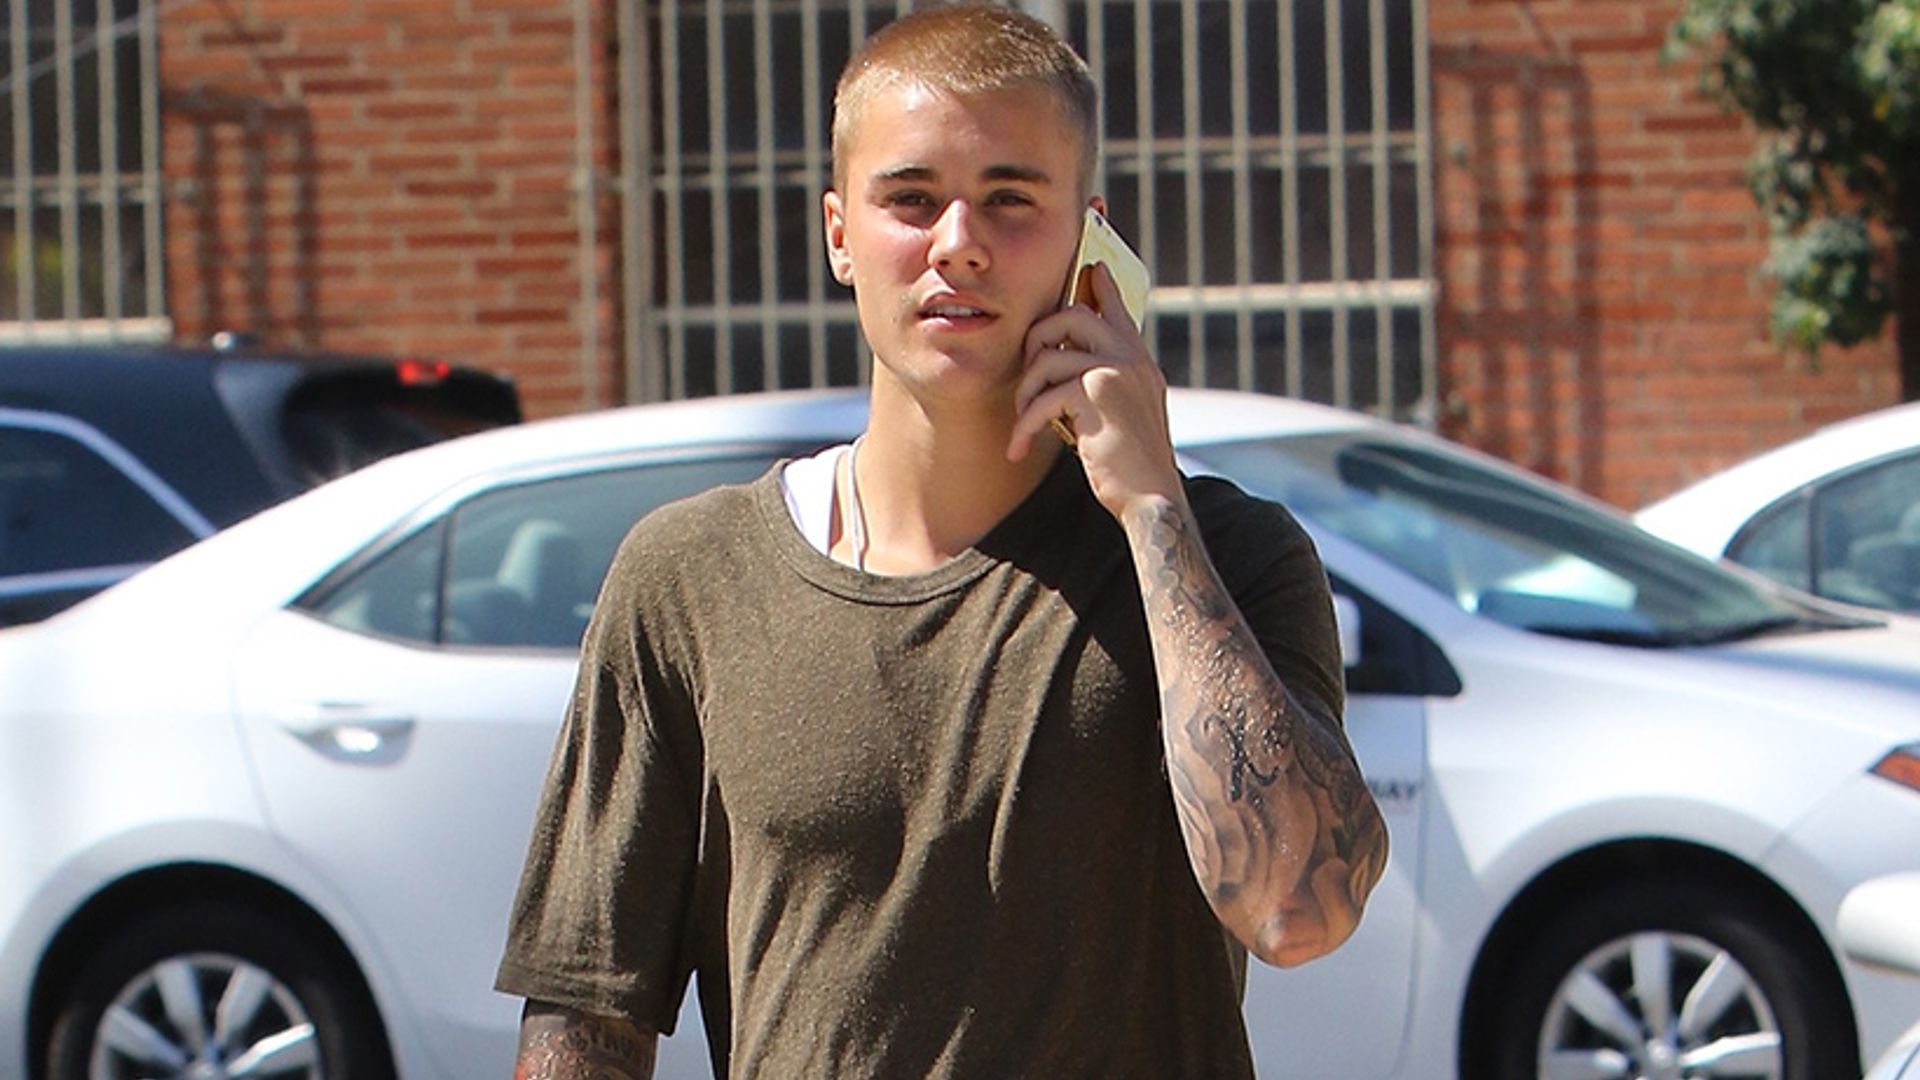 Justin Bieber deletes Instagram account following fallout with Selena Gomez